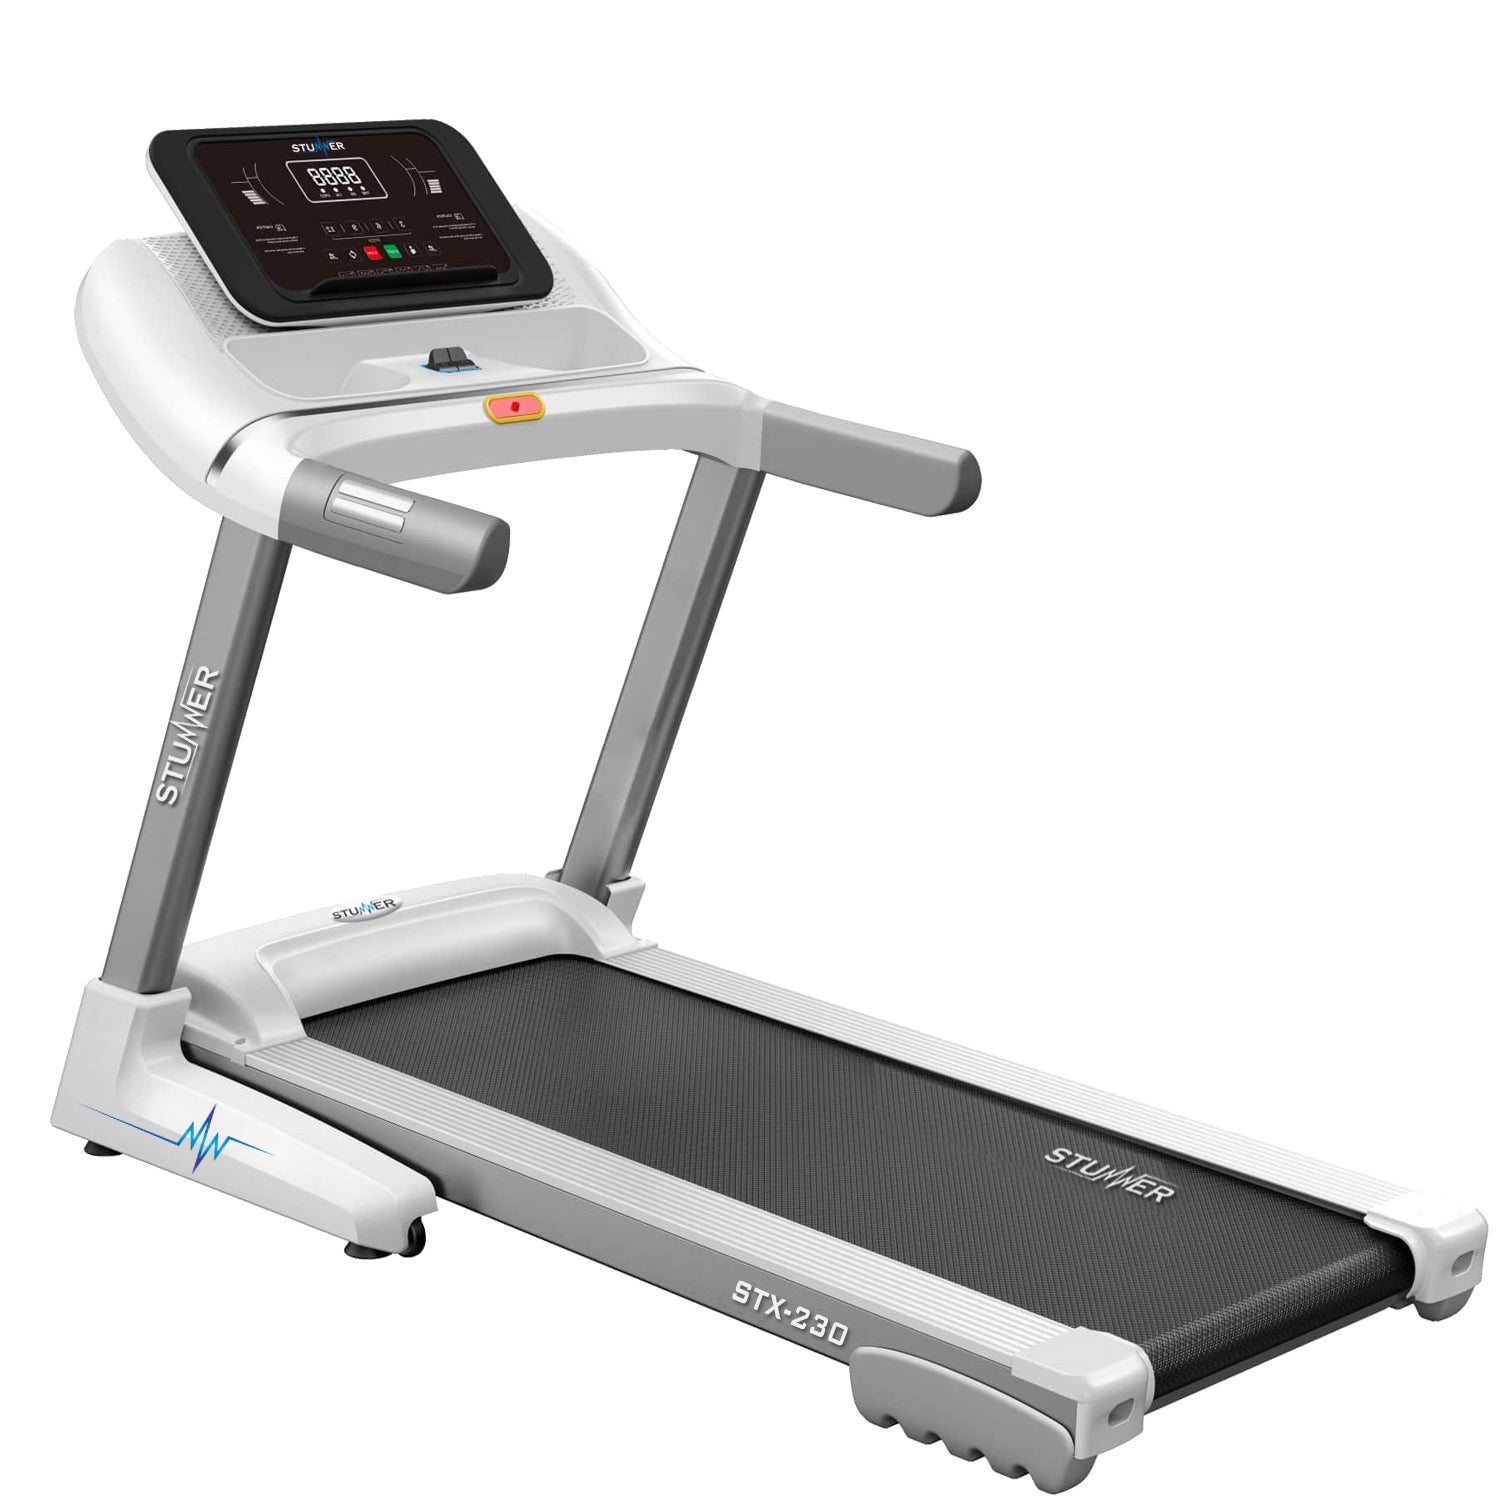 Stunner Fitness STX-230 2.0HP (4.0HP Peak) Motorised Treadmill with SSAT Technology | Bluetooth Speakers for Home Use